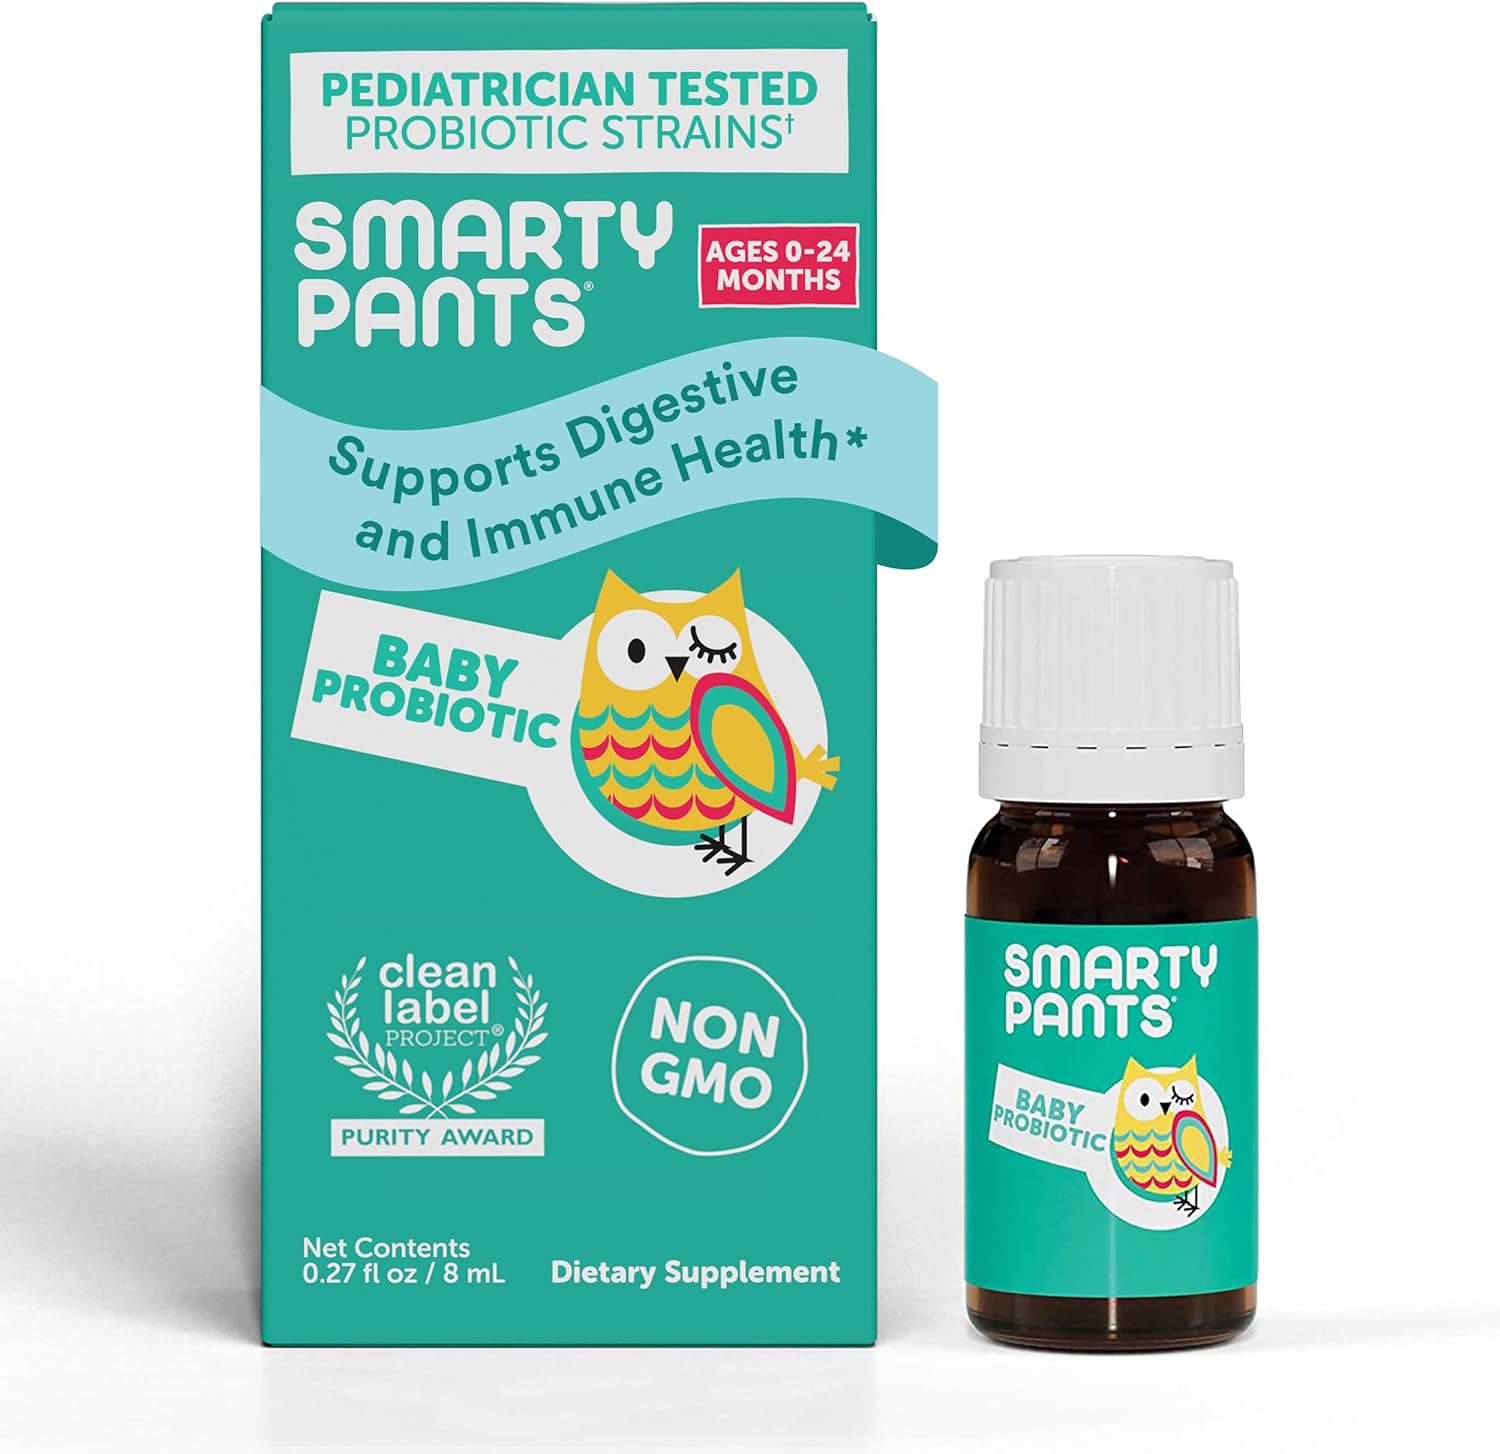 SmartyPants Baby Probiotic Drops: Probiotics for Digestive Health and Immune Support Supplement, for Infants 0-24 Months, Vegan, Gluten Free, Pediatrician Tested (30 Day Supply)